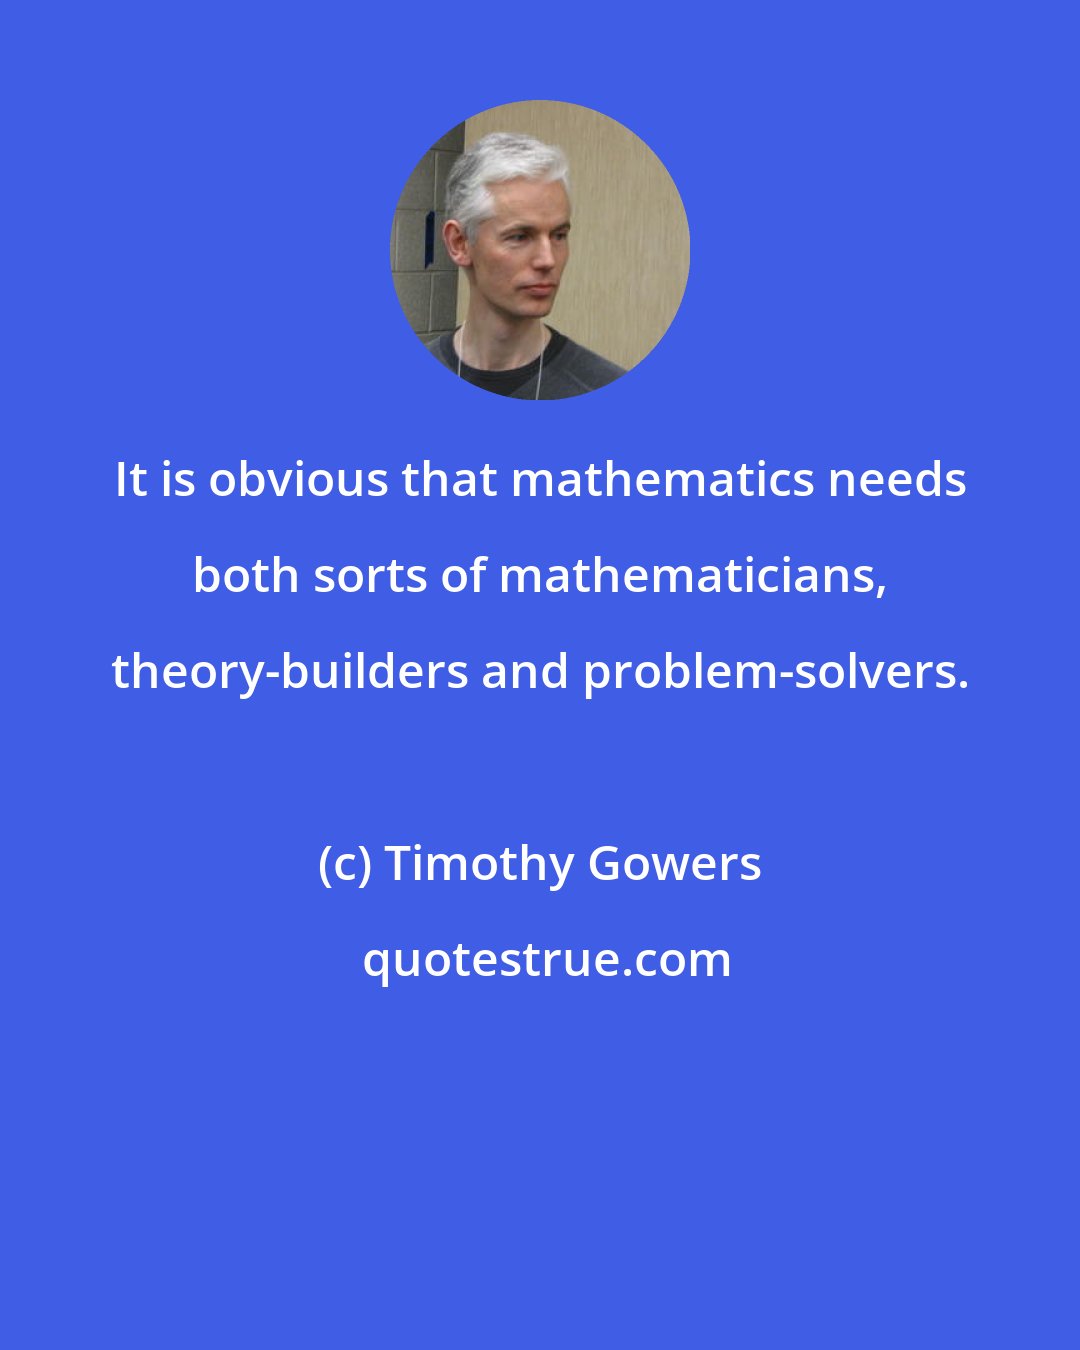 Timothy Gowers: It is obvious that mathematics needs both sorts of mathematicians, theory-builders and problem-solvers.